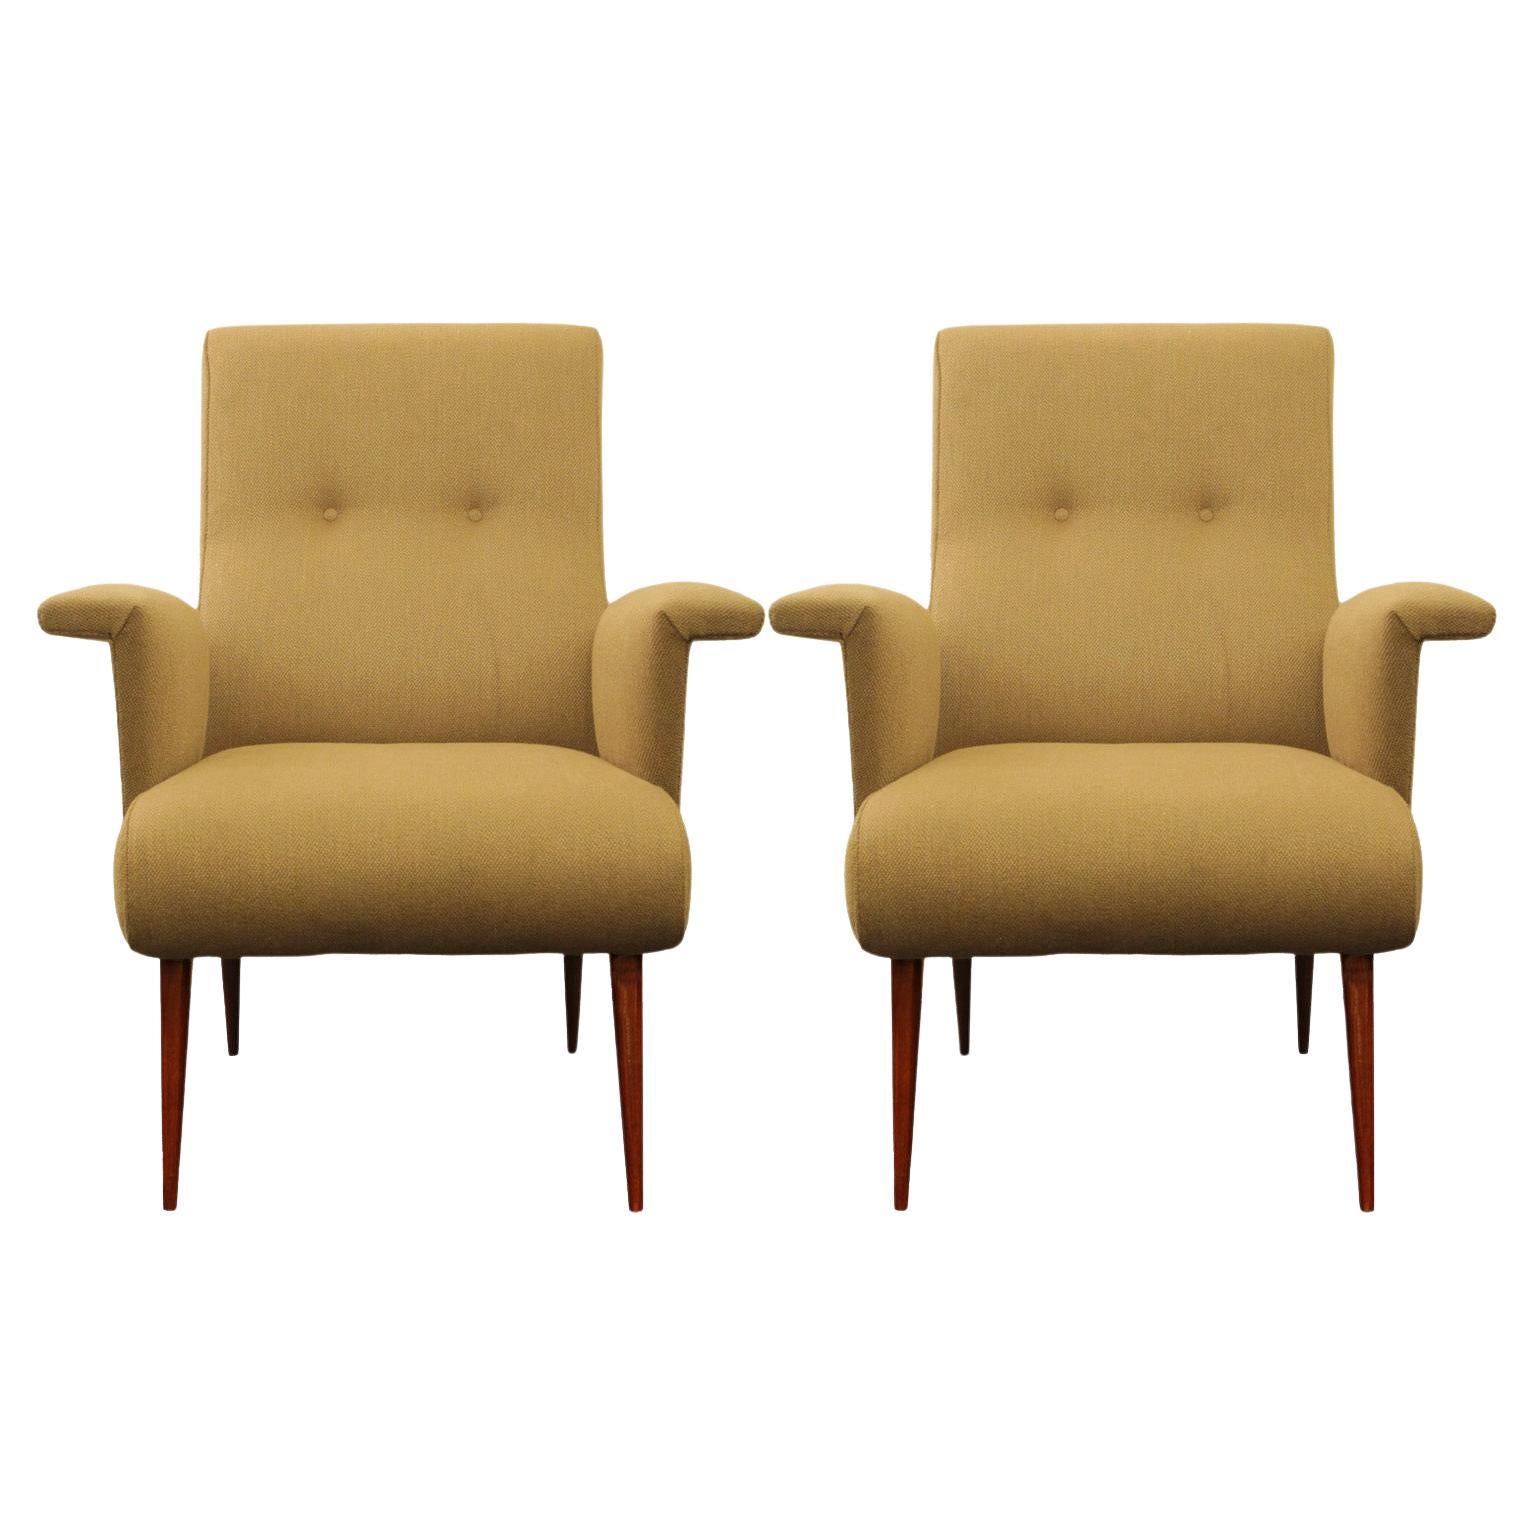 Chic Pair of Venfield "Sparrow" Chairs